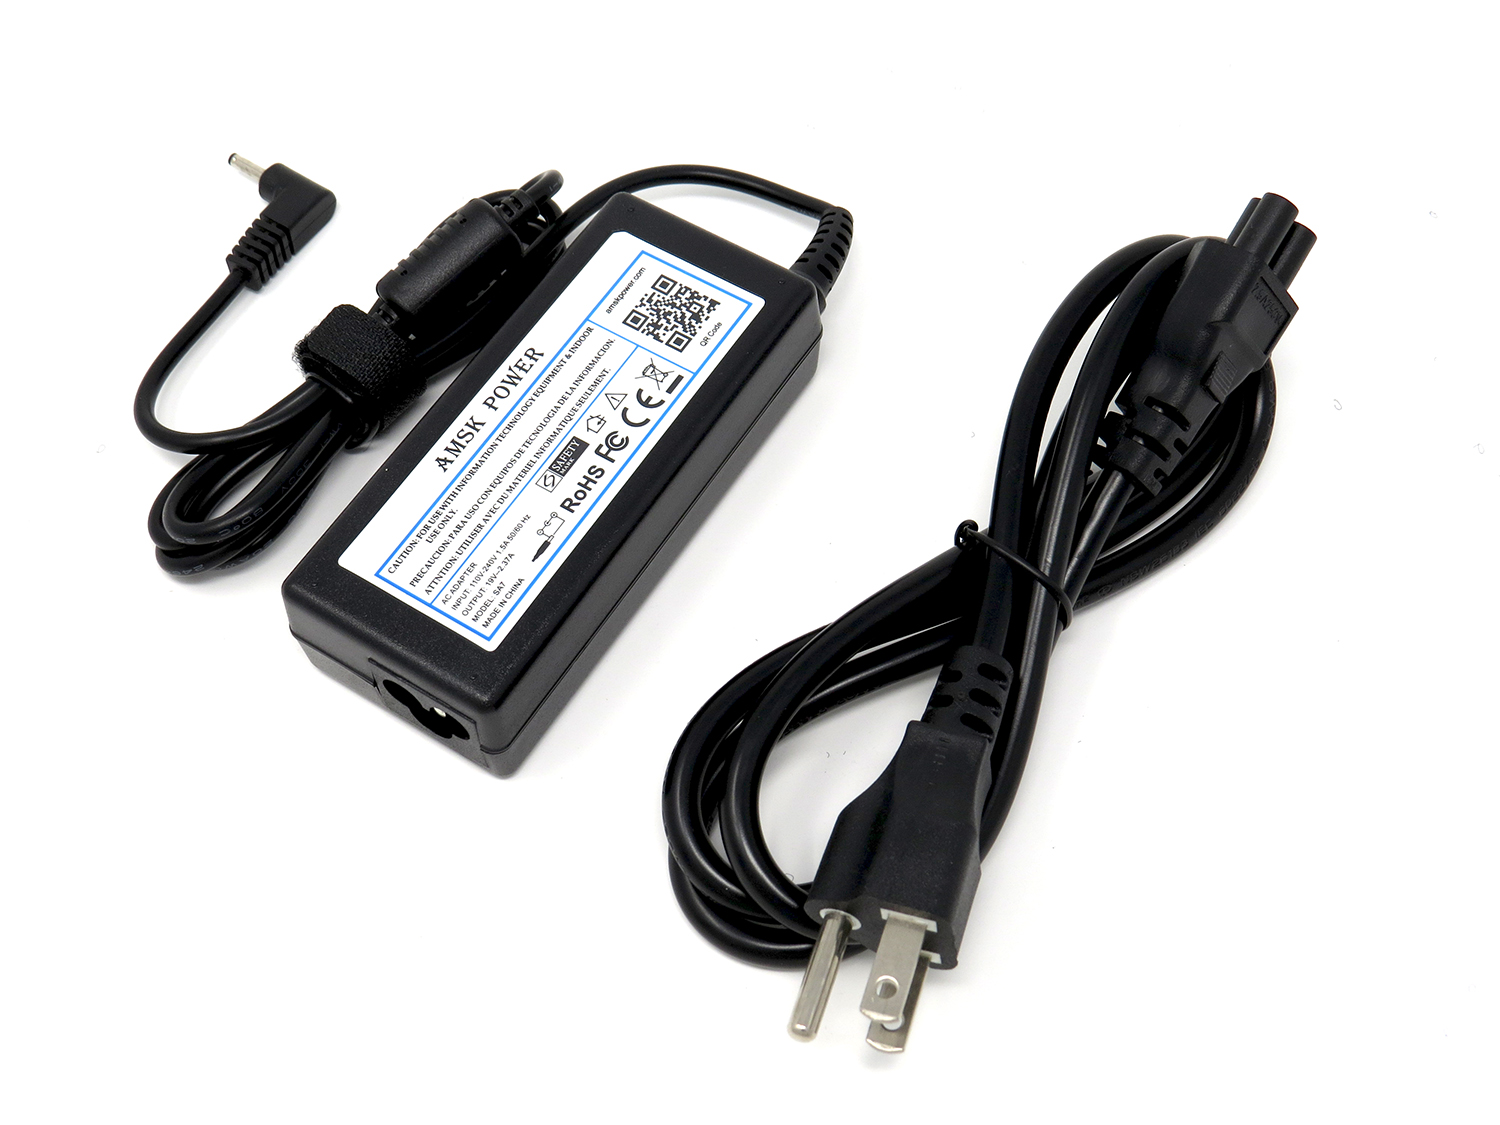 AMSK POWER AC Adapter for Samsung Series 5 Chromebook 500c21 Xe500c21 Xe550c22 Xe550c22-a01us - image 1 of 3